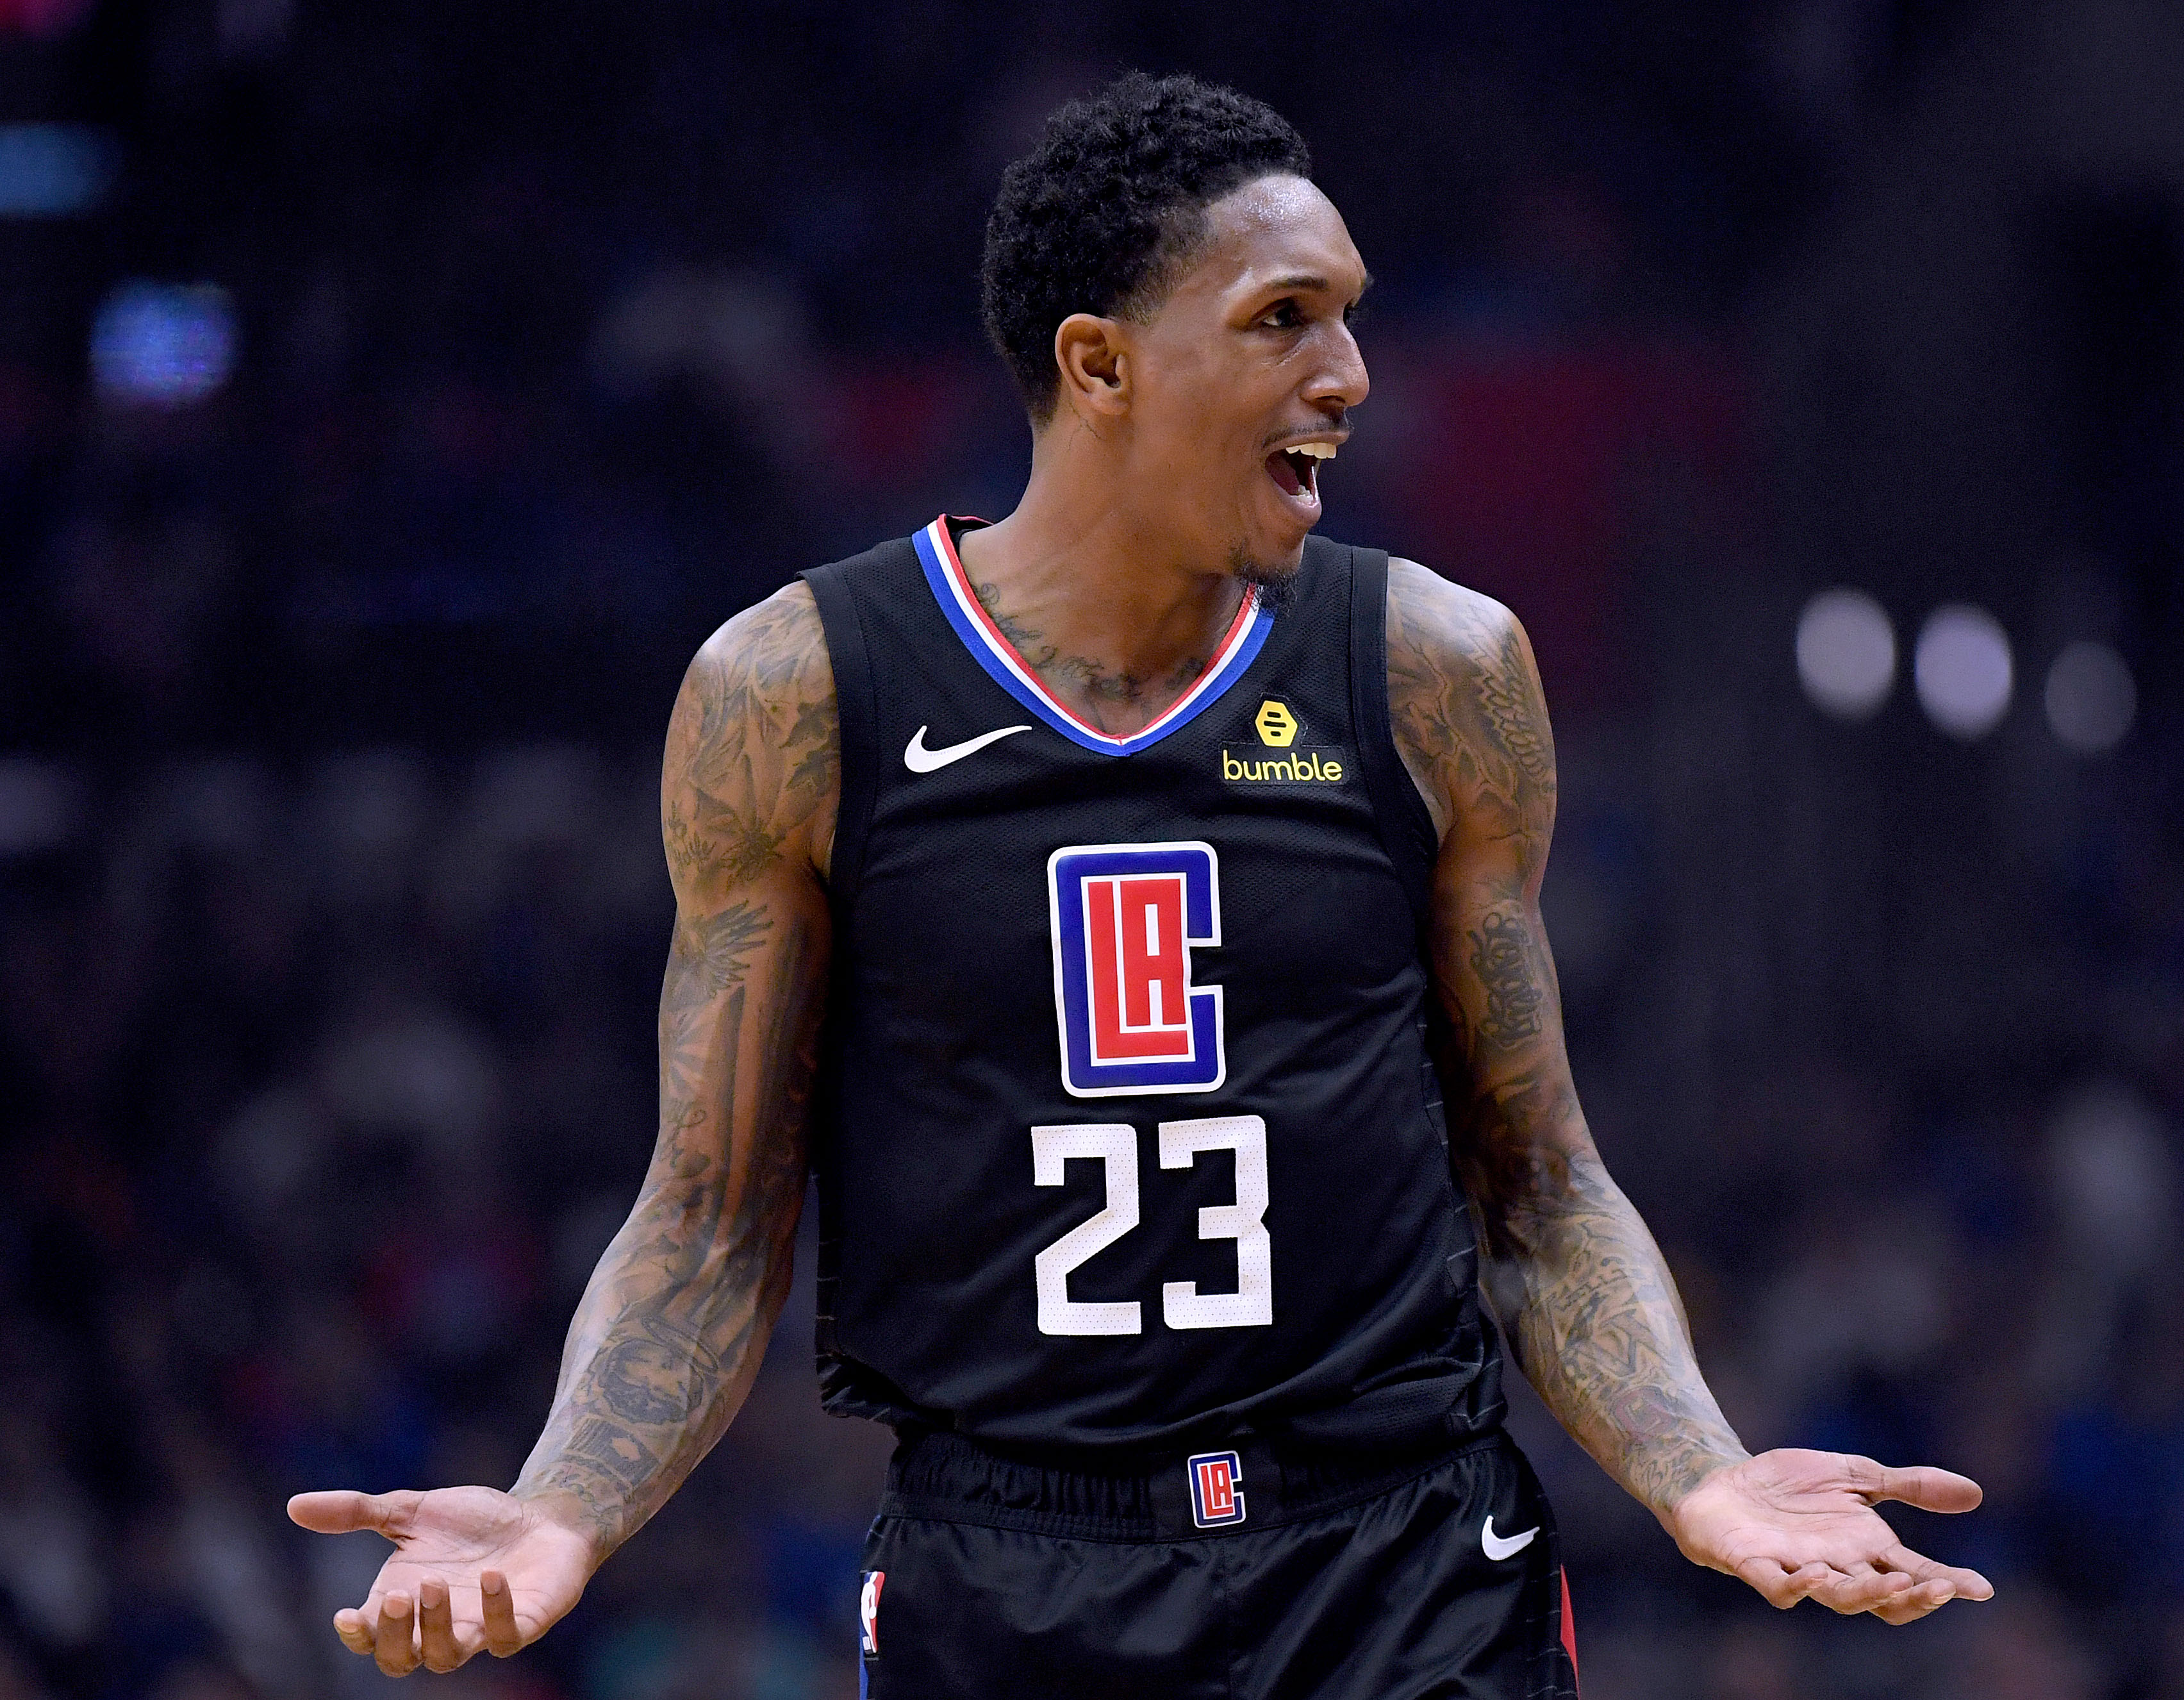 Clippers' Lou Williams 'visited strip club for the chicken wings